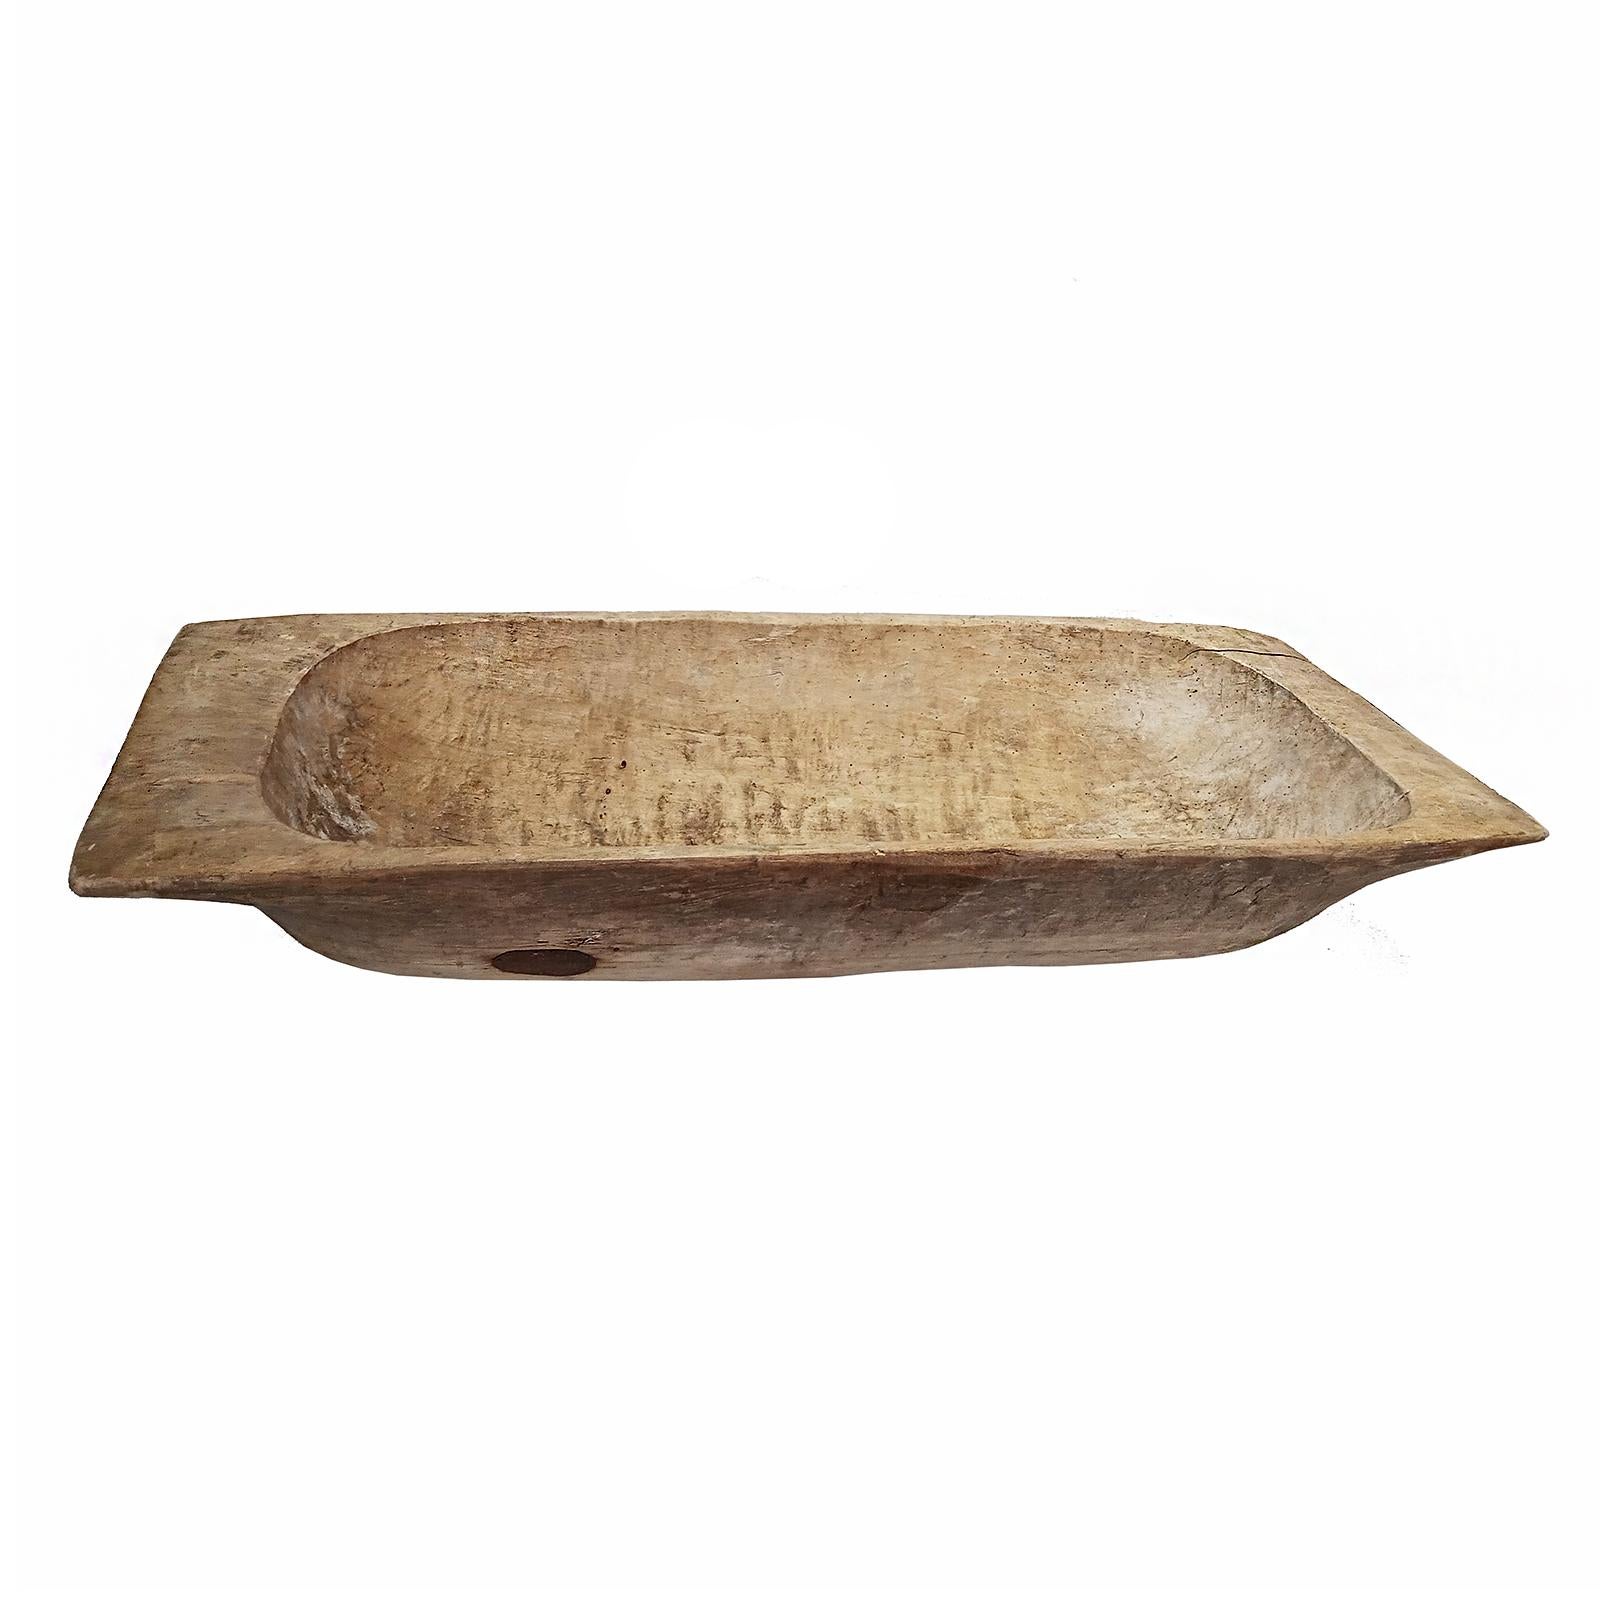 Hand-Carved Vintage African Wood Trough, Early 20th Century For Sale